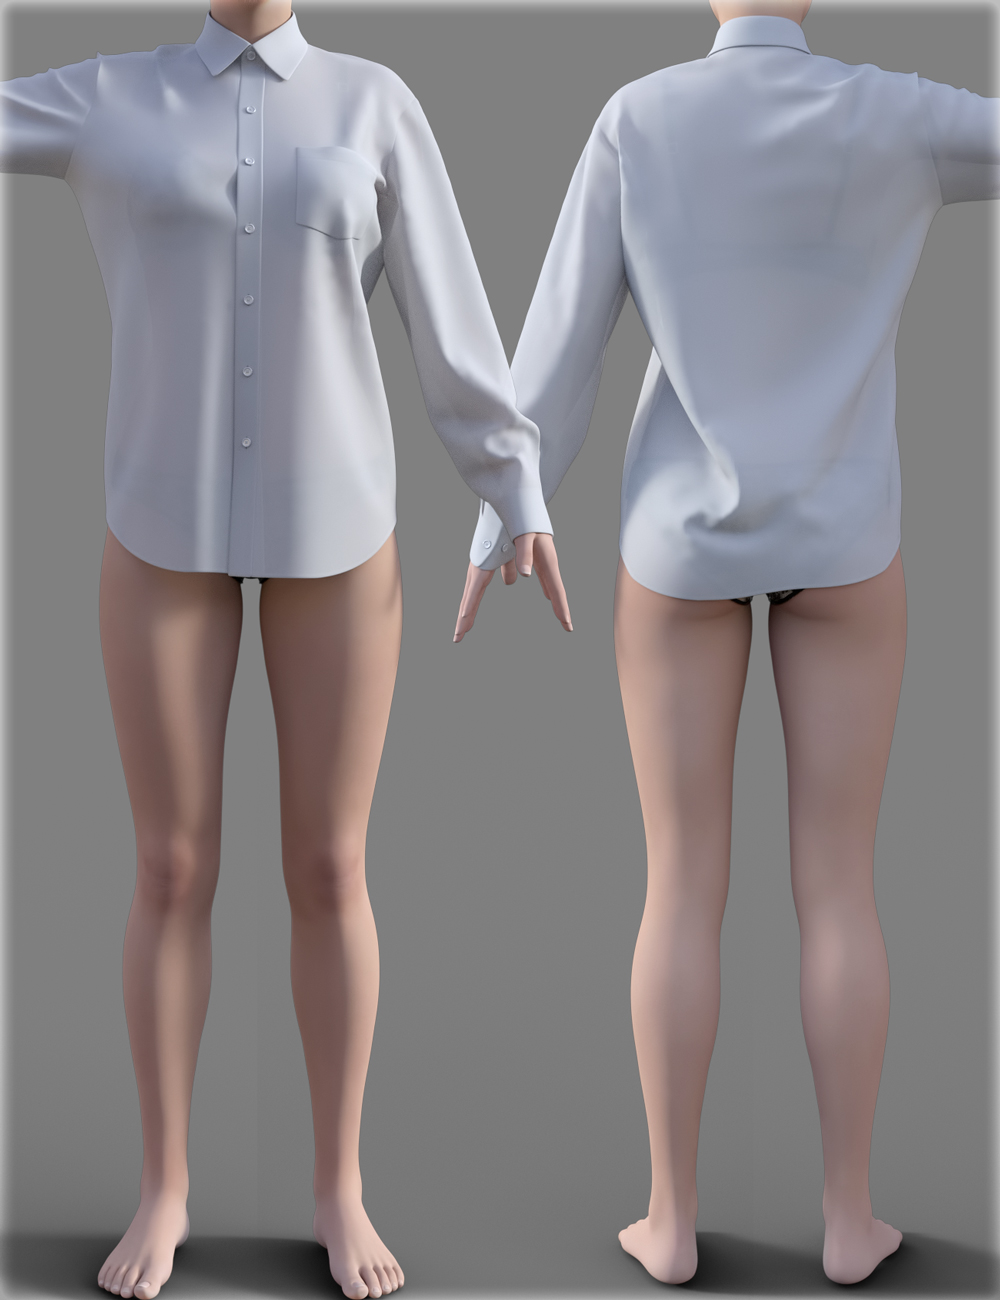 Men's Shirt for Genesis 3 Female(s) by: IH Kang, 3D Models by Daz 3D